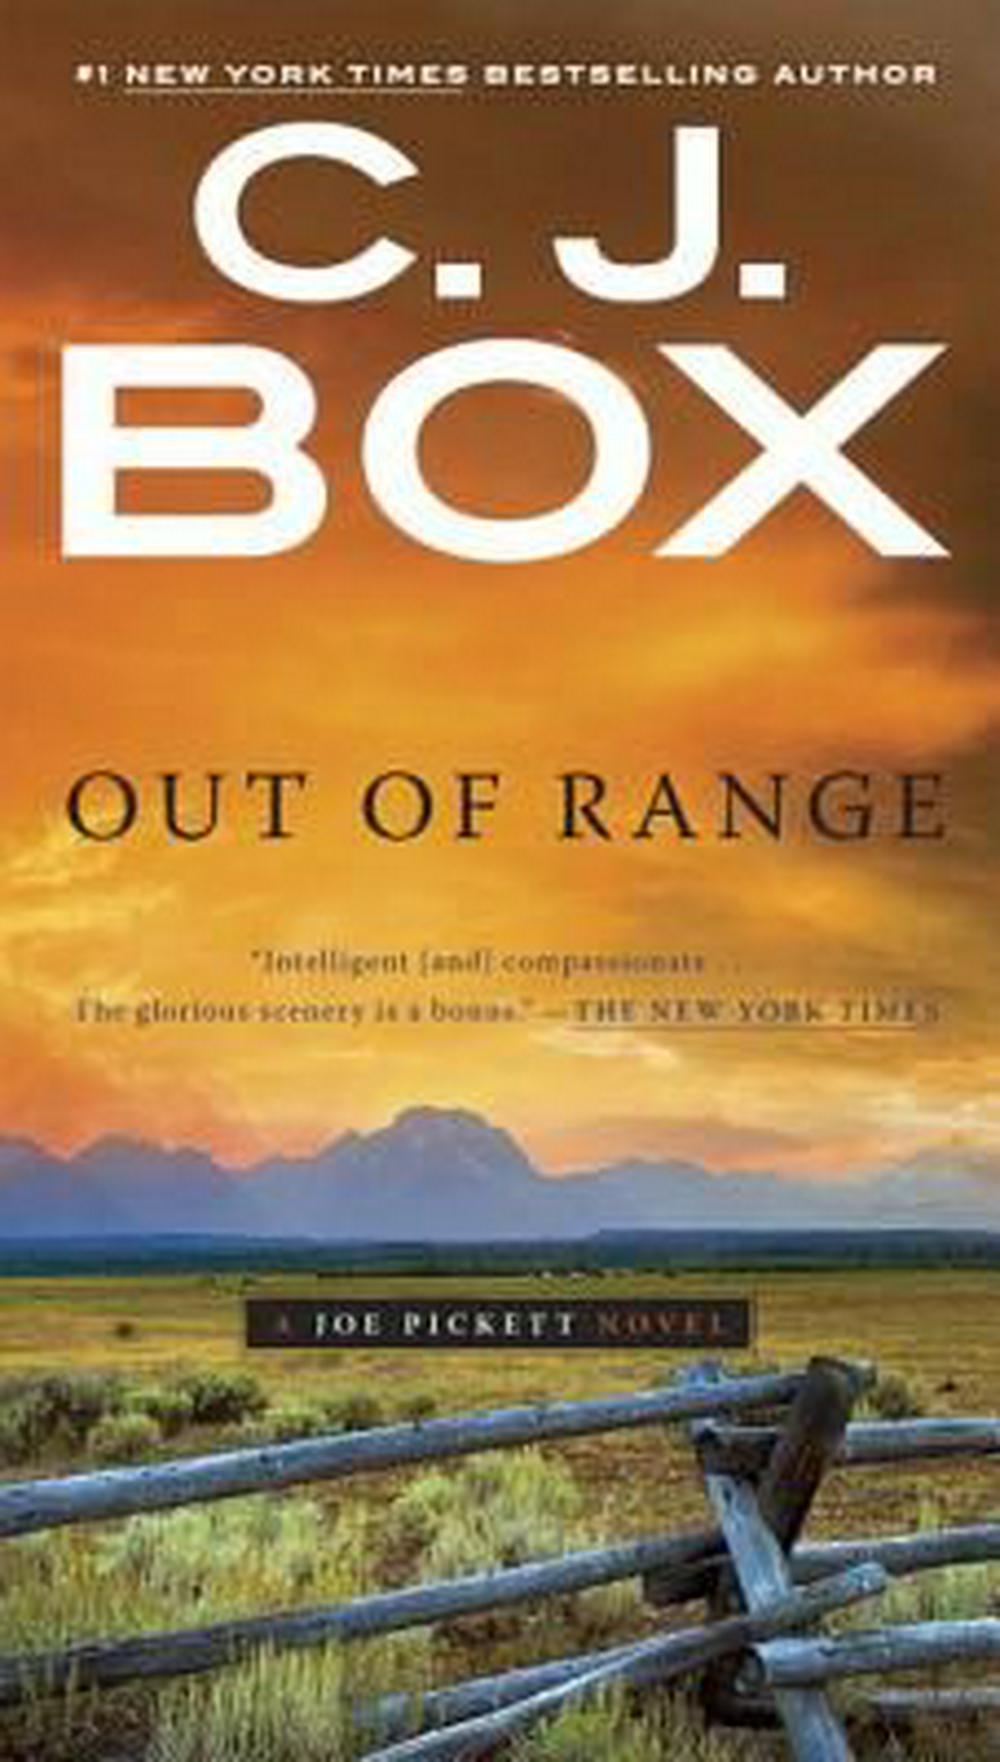 Out of Range by CJ Box - City Books & Lotto